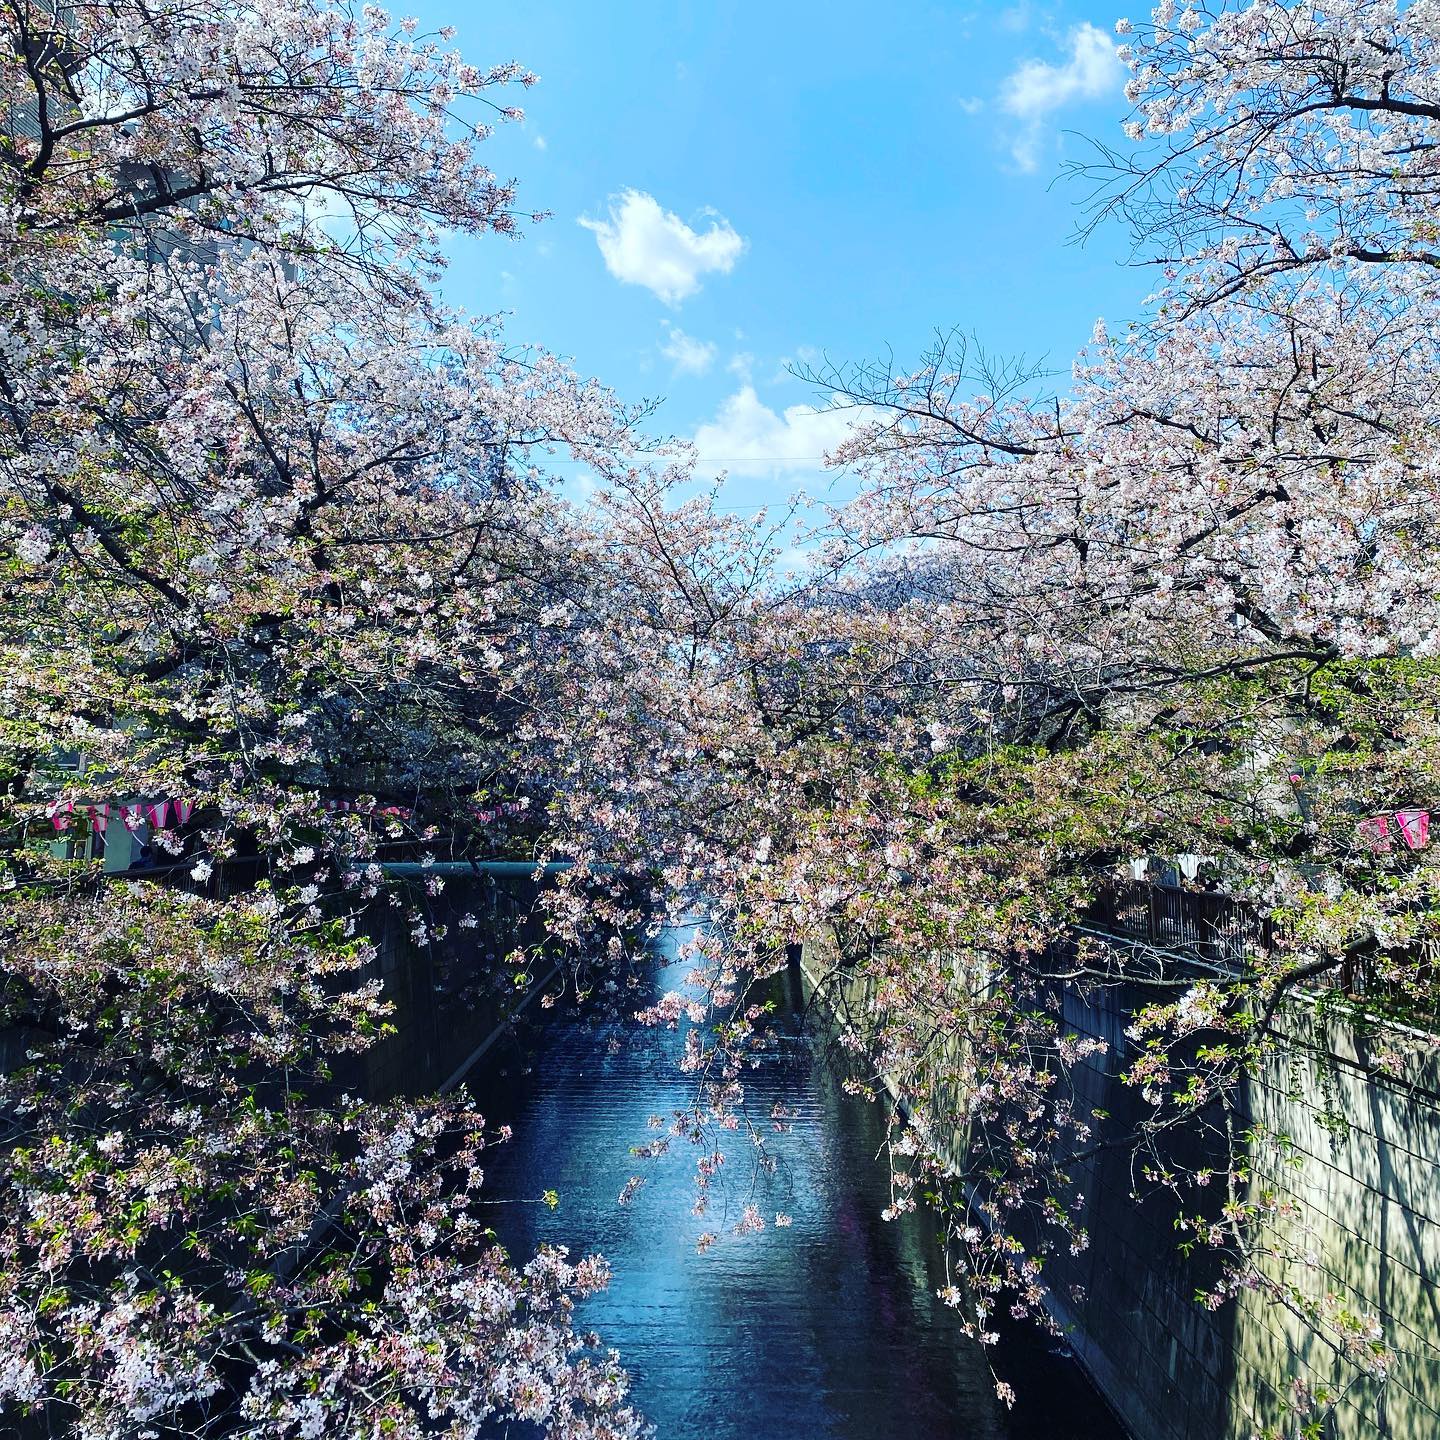 _
Just some of the cherry blossom pictures we took this year at our Nakameguro office and around Tokyo

The season felt extra special with AOI Pro. lanterns placed outside our office

#tokyocherryblossom⁣